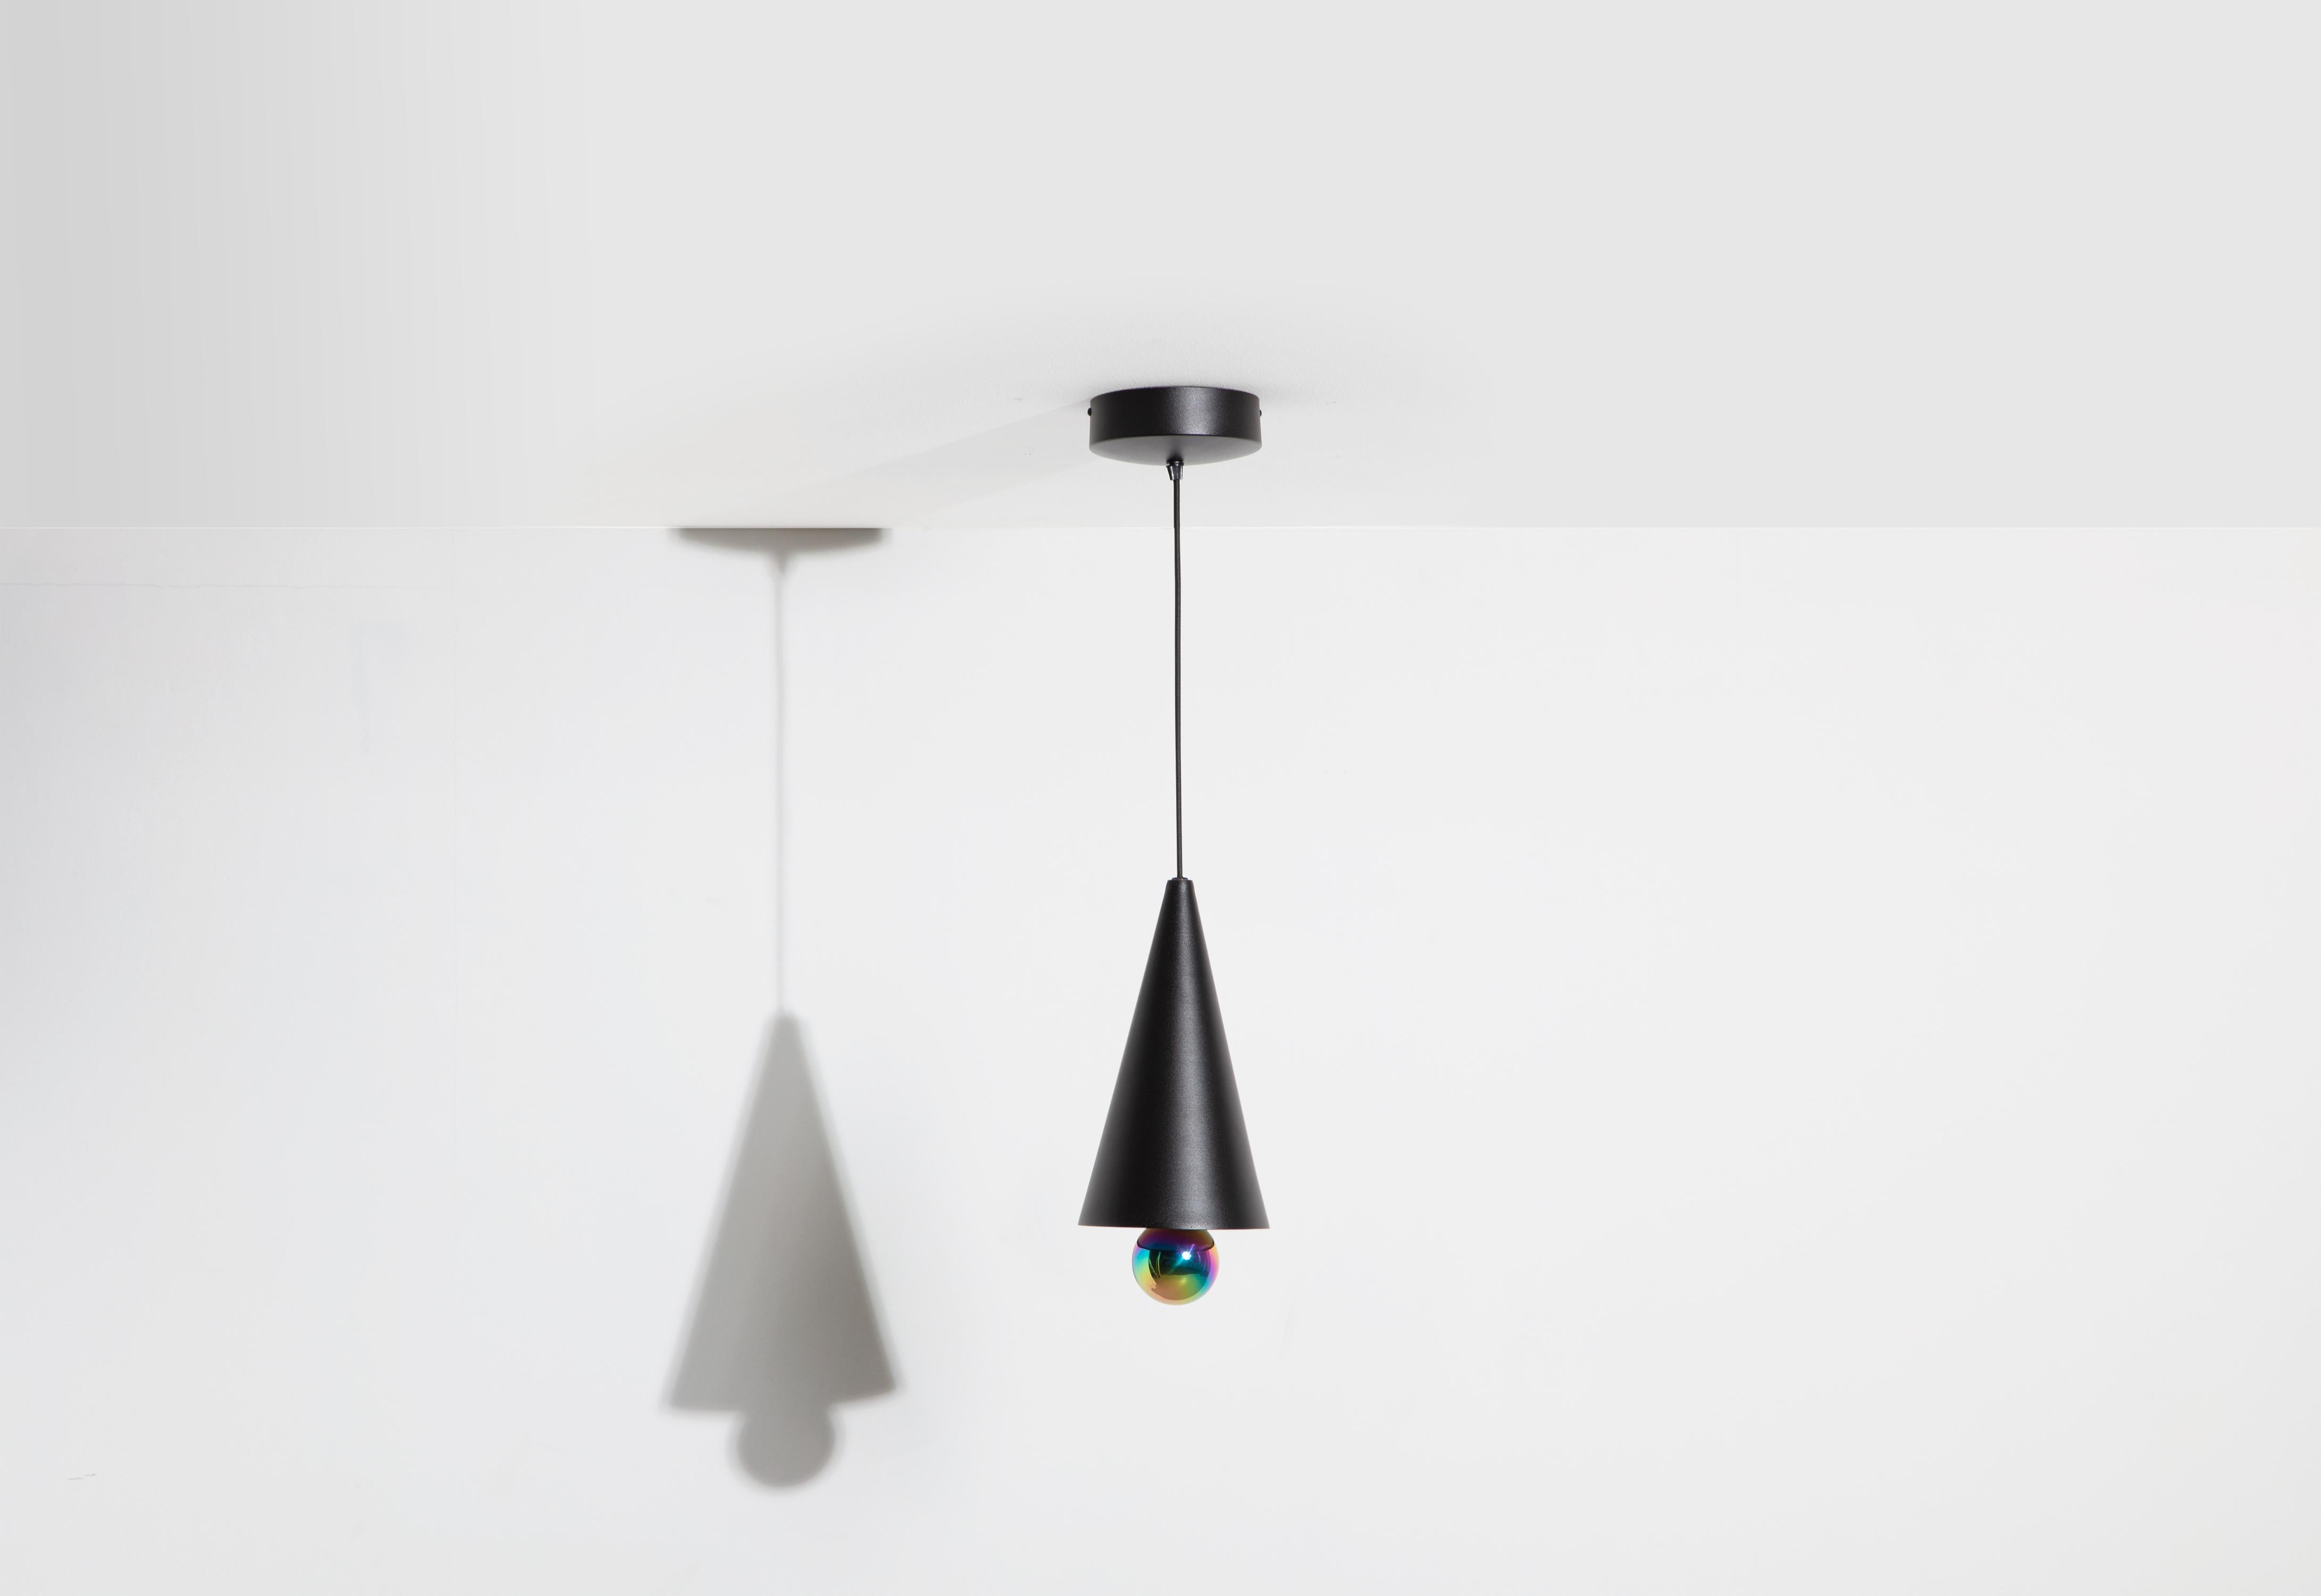 Petite Friture Small Cherry LED Pendant Light in Black & Rainbow Aluminium by Daniel and Emma, 2020

In 2015, the Australian duo designers Daniel and Emma signed Cherry a simple and minimalist pendant lamp design ; an aluminum cone with a bottomed